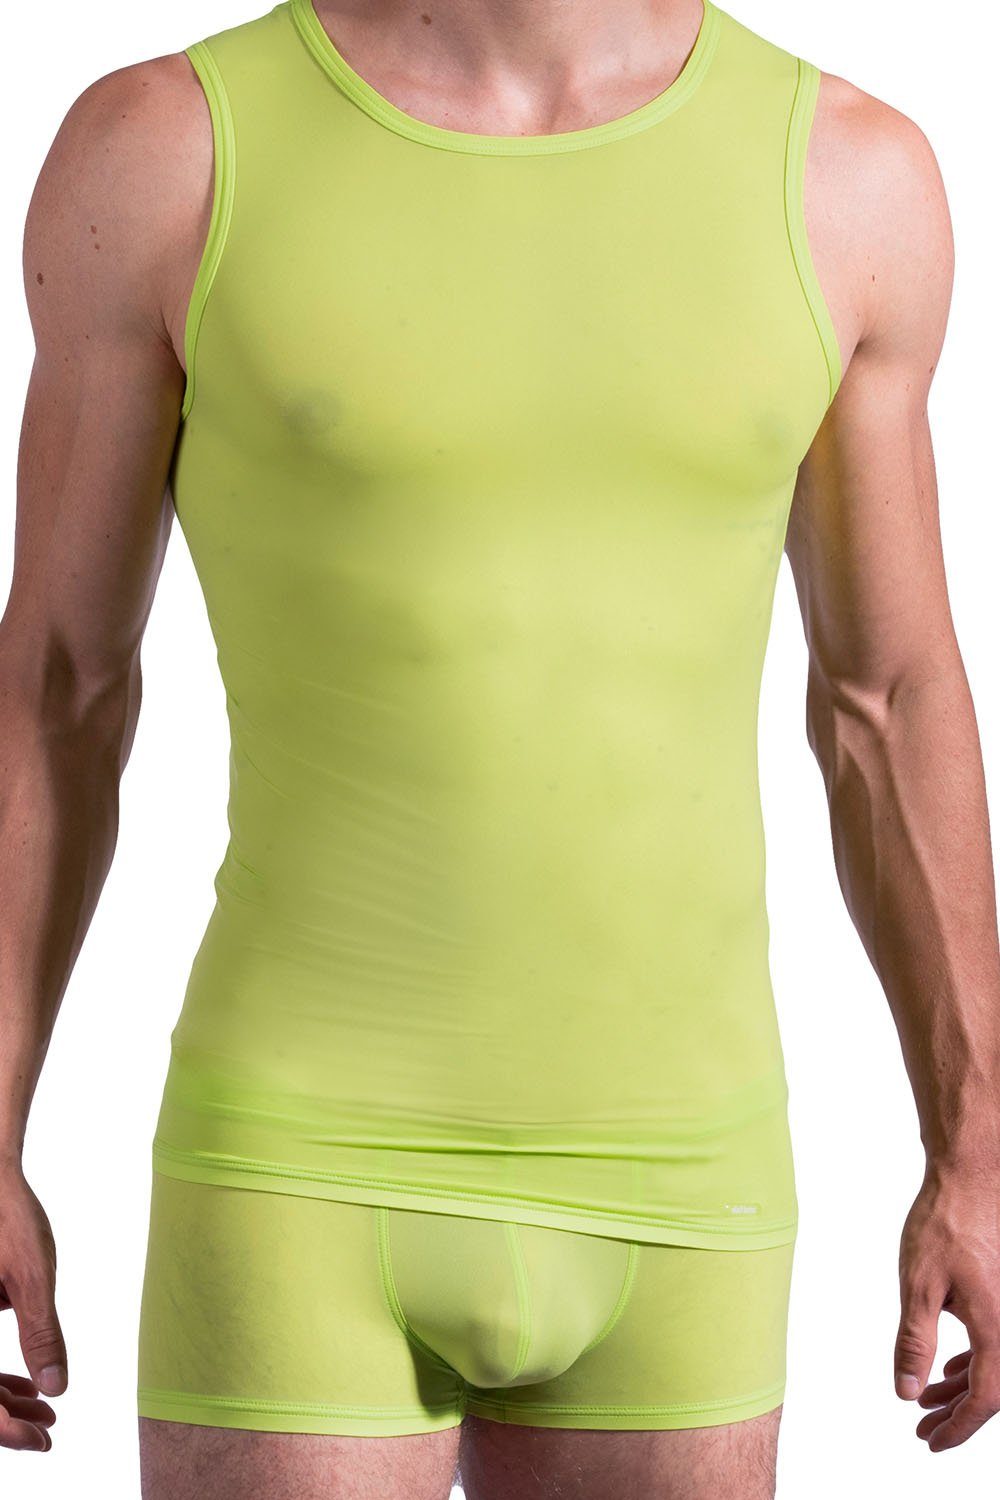 green Tanktop Olaf lime 106025 Muskelshirt Benz